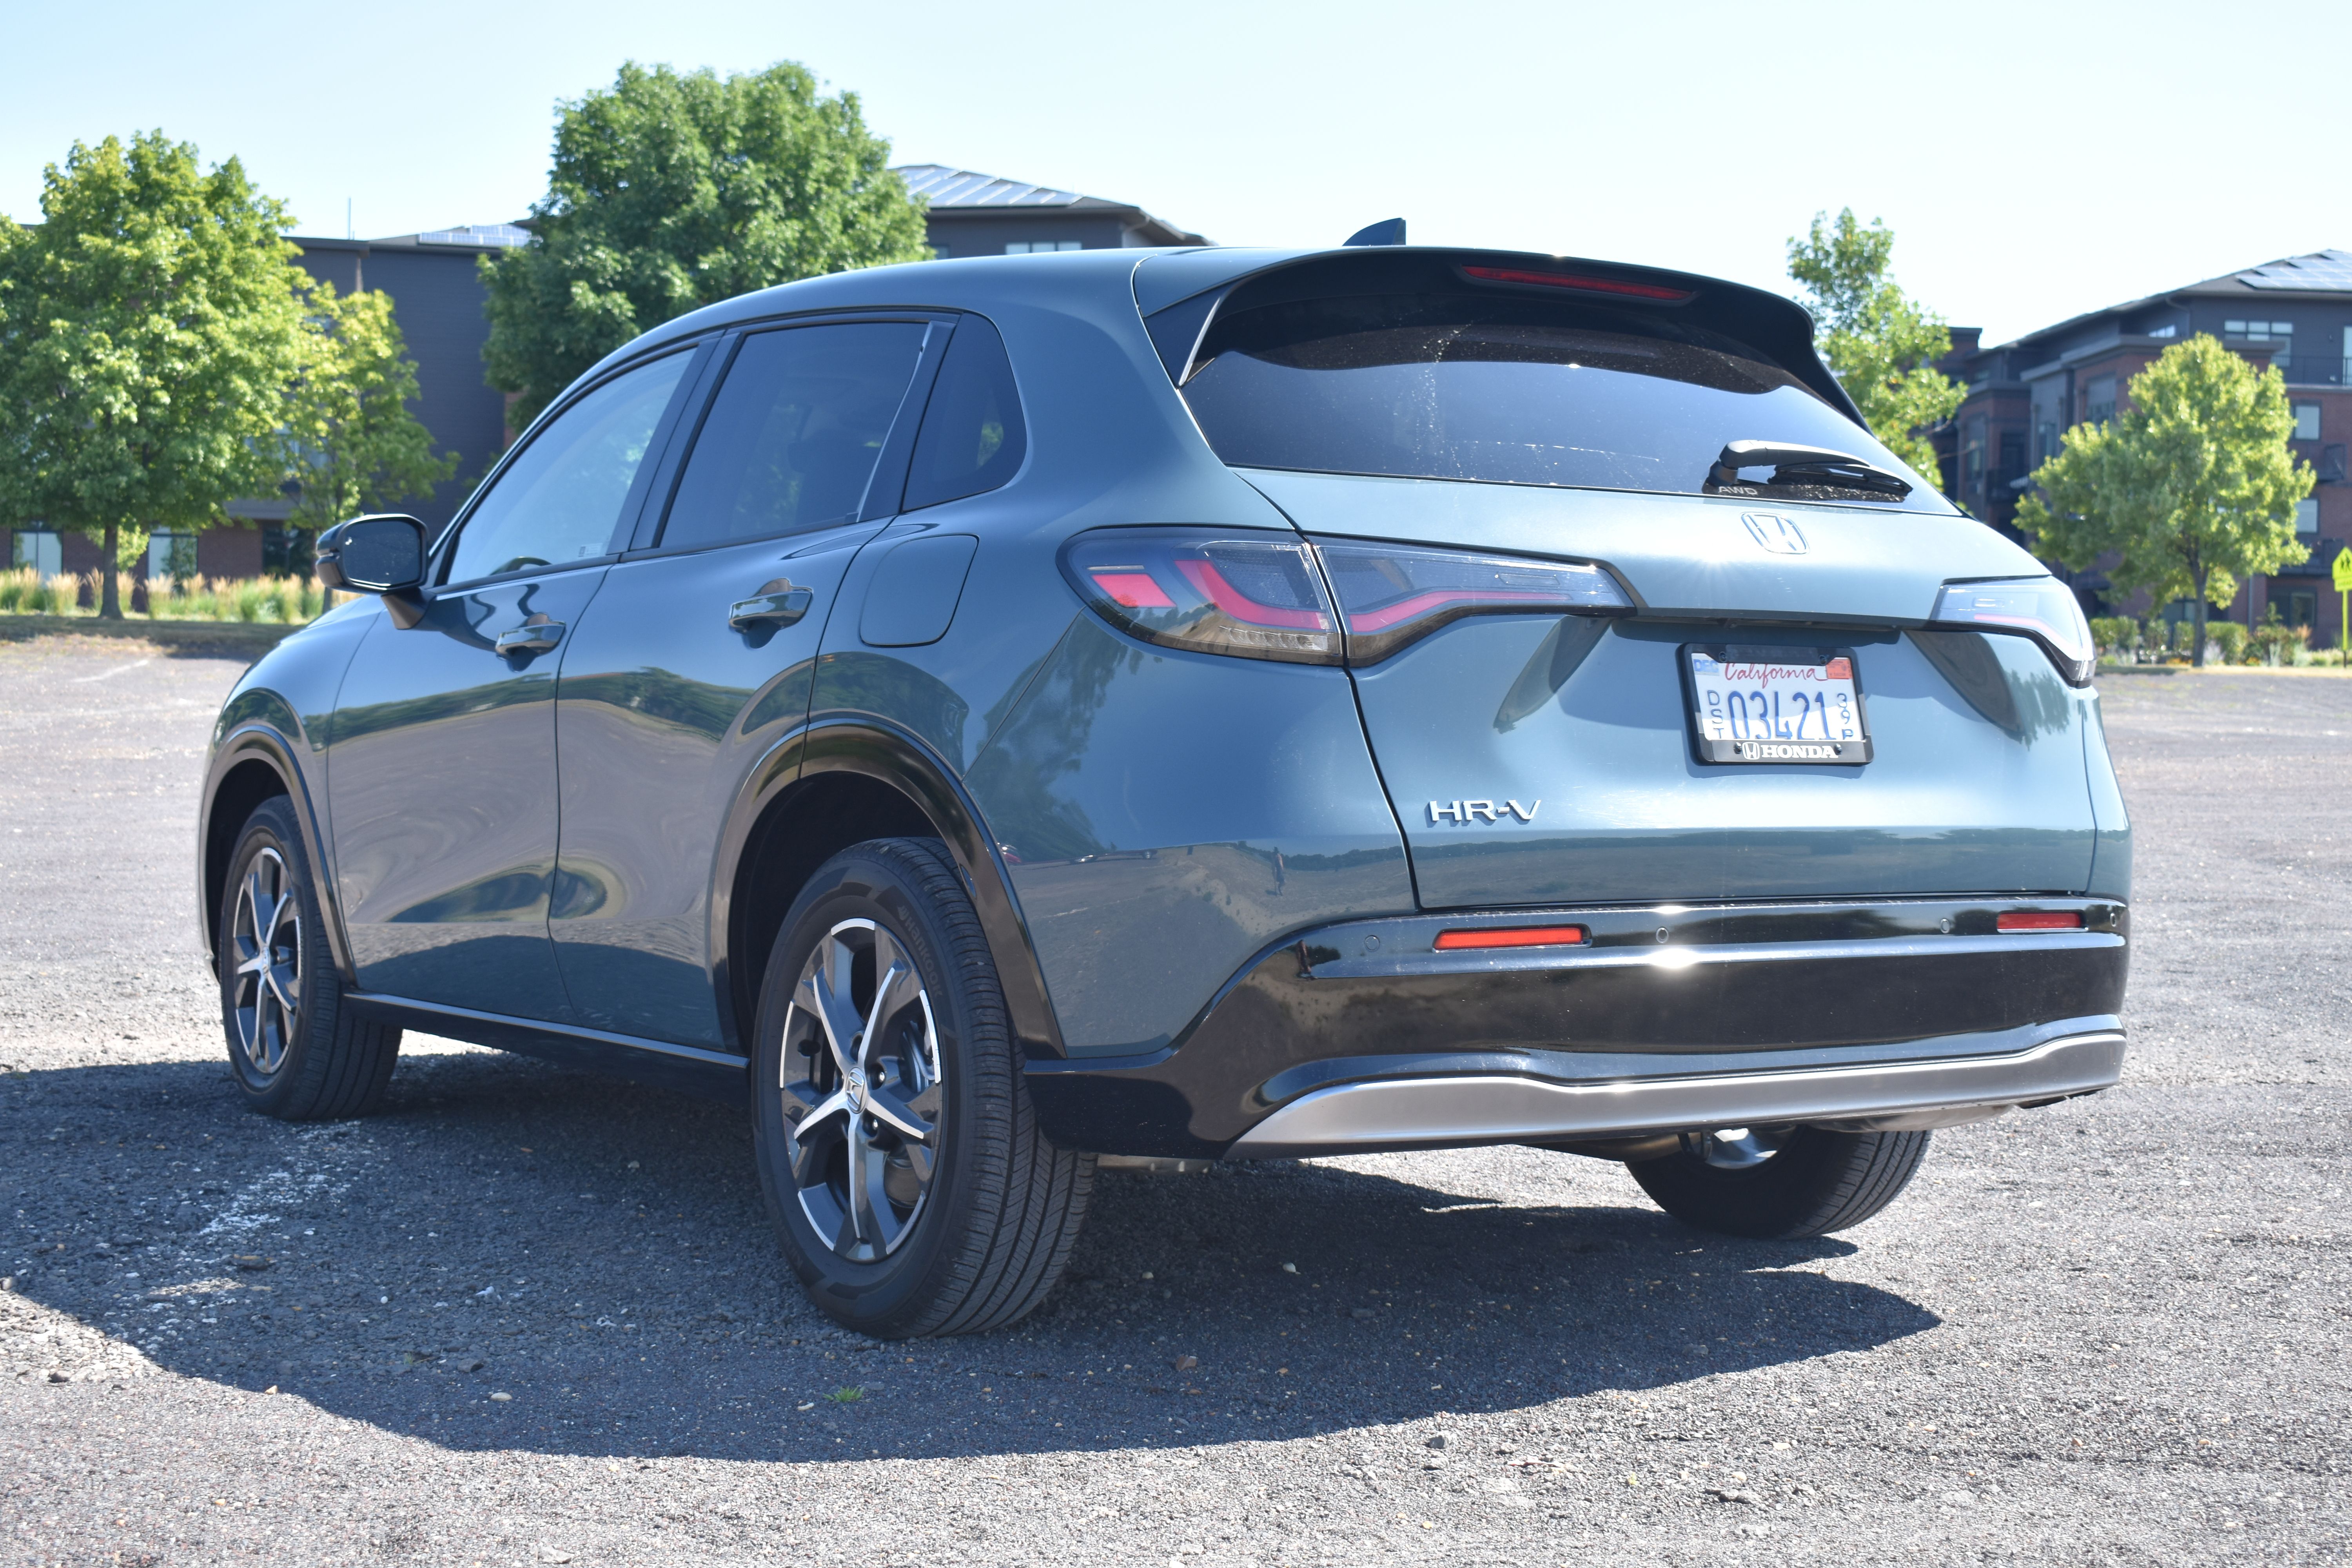 2023 Honda HR-V Review: A Desirable Subcompact SUV With Few Flaws